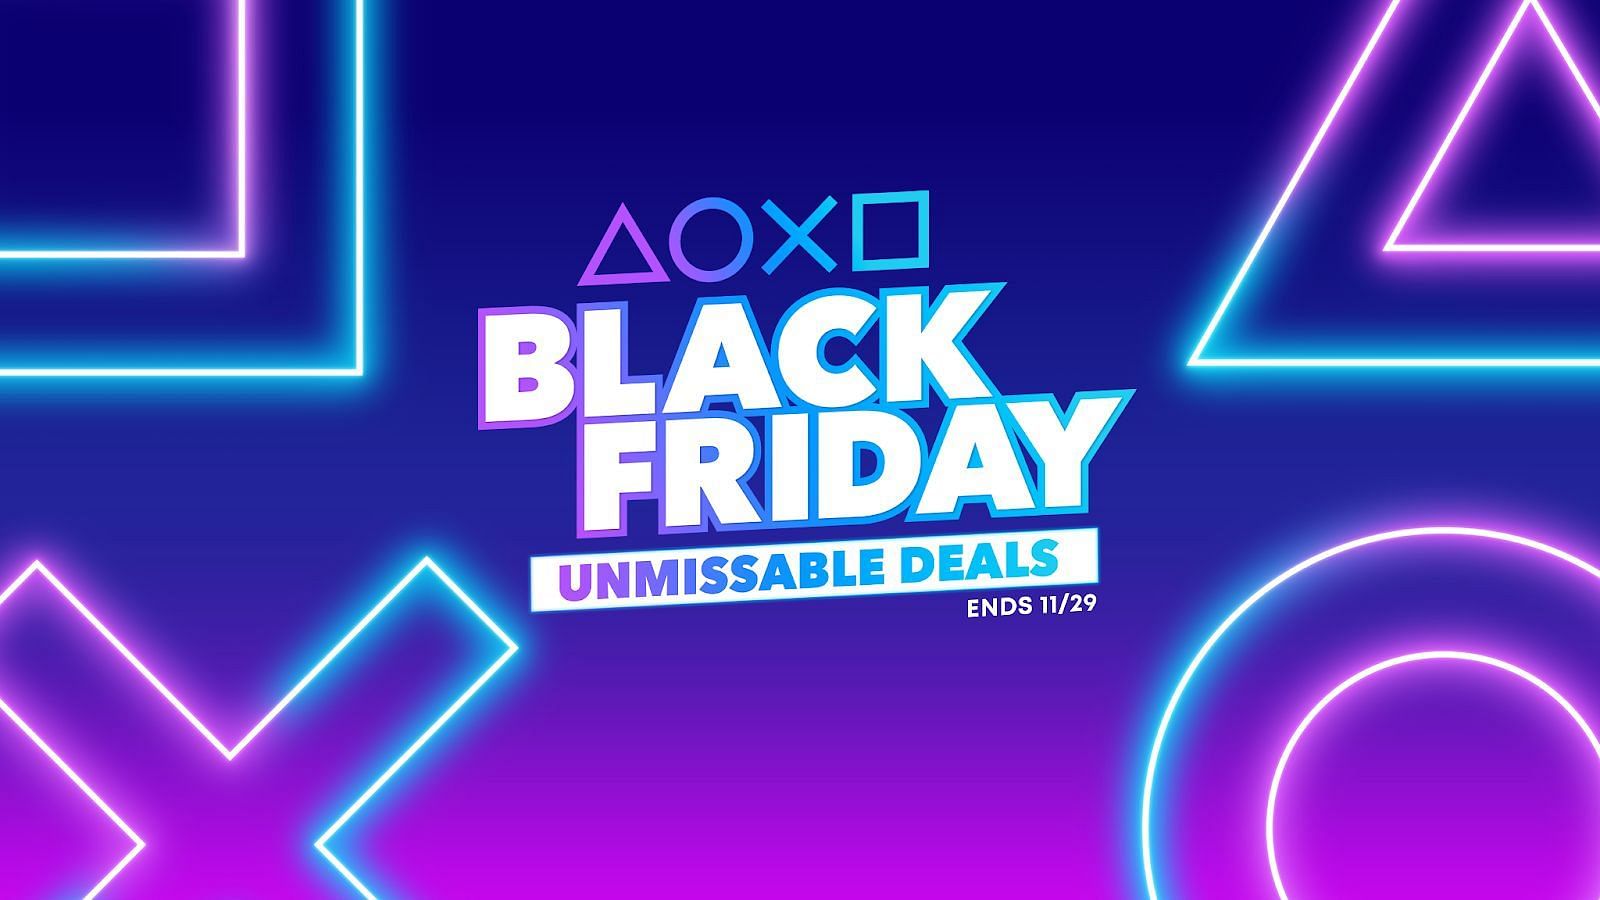 PlayStation Store Black Friday deals and discounts revealed